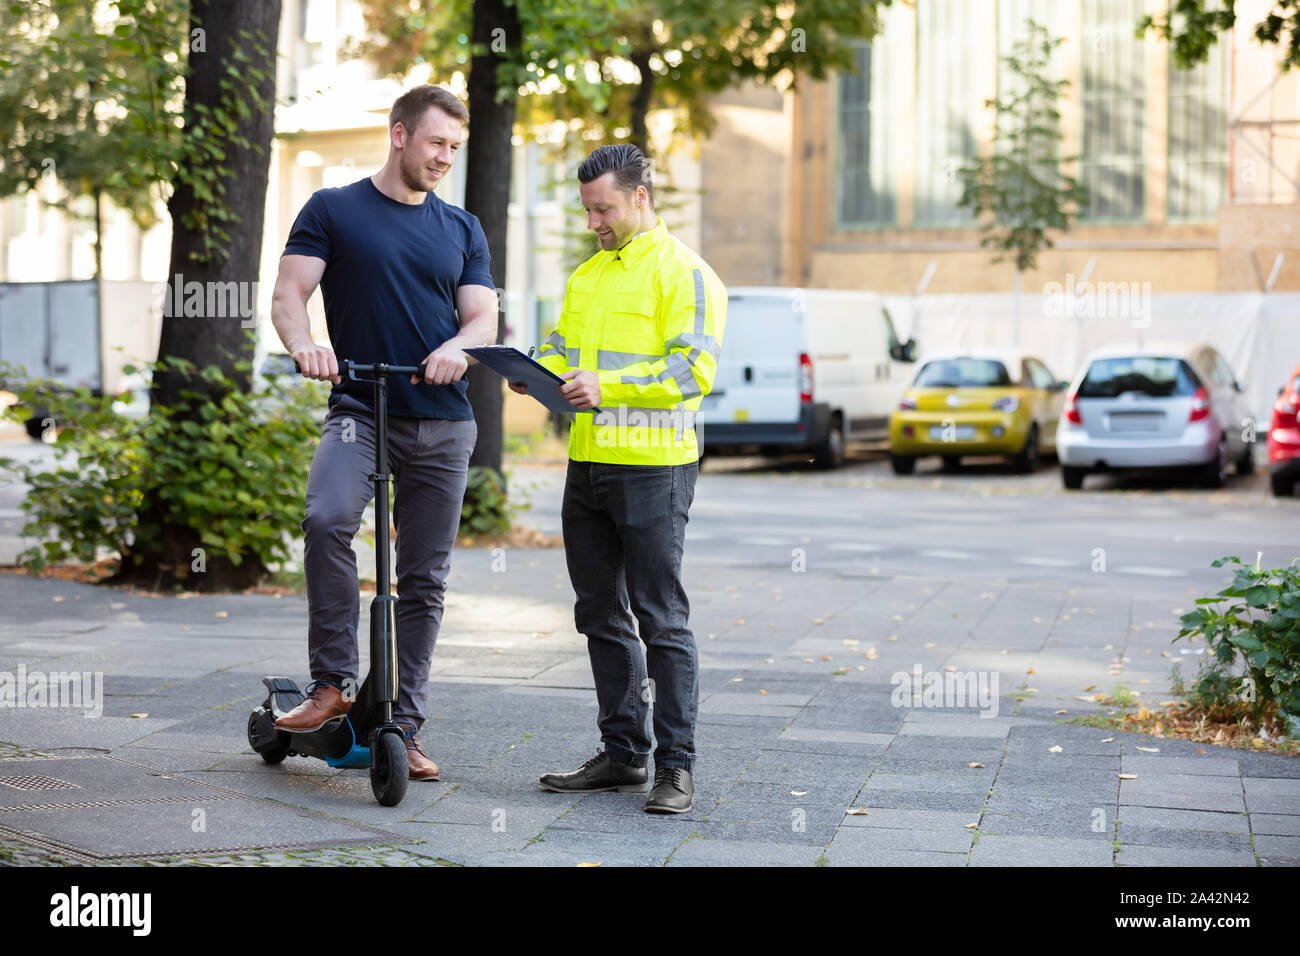 Officer Holding Clipboard In Hand Standing With Man Riding Electric Scooter On City Street Stock Photo